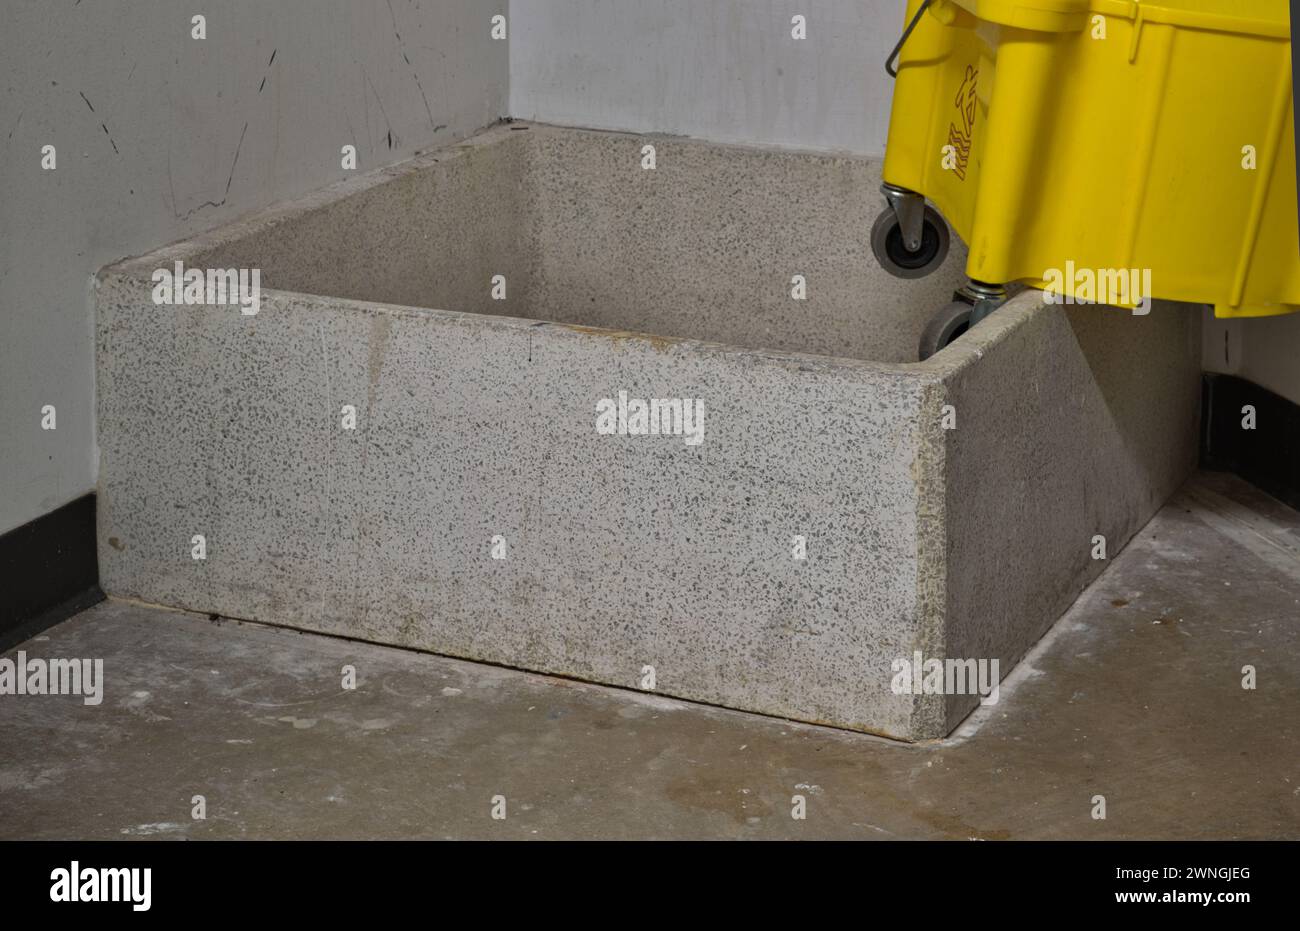 Janitor closet drain and wash basin with a partial mop bucket sitting on top. Janitorial supplies and custodian occupation. Stock Photo